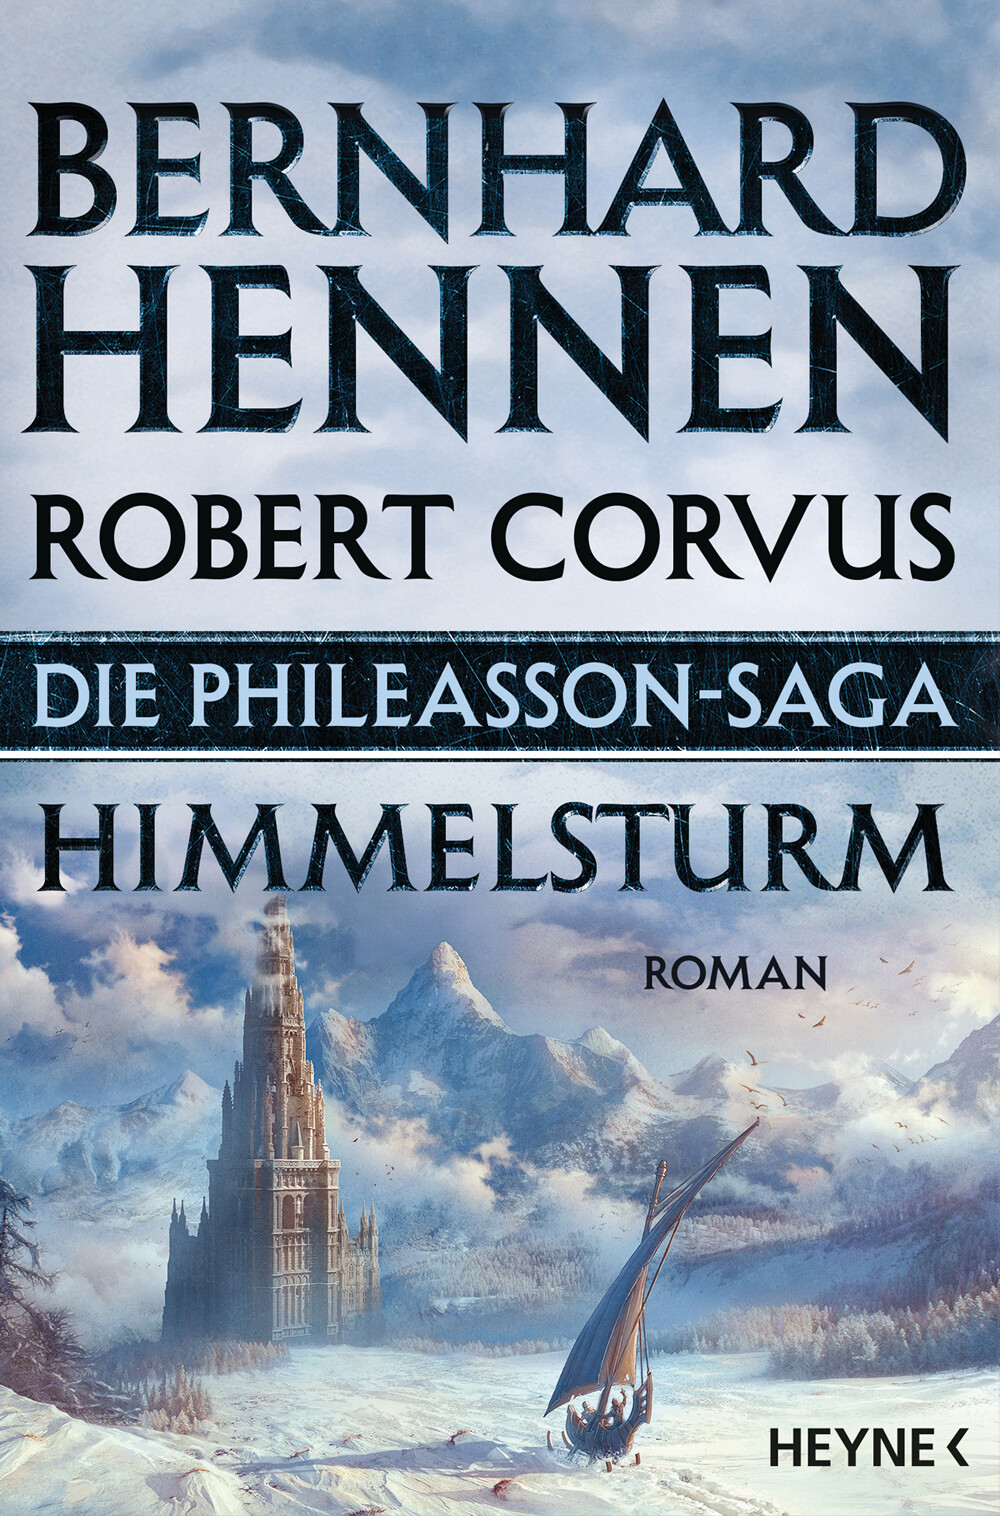 Die Phileasson-Saga Book Two -  Himmelsturm Cover Layout